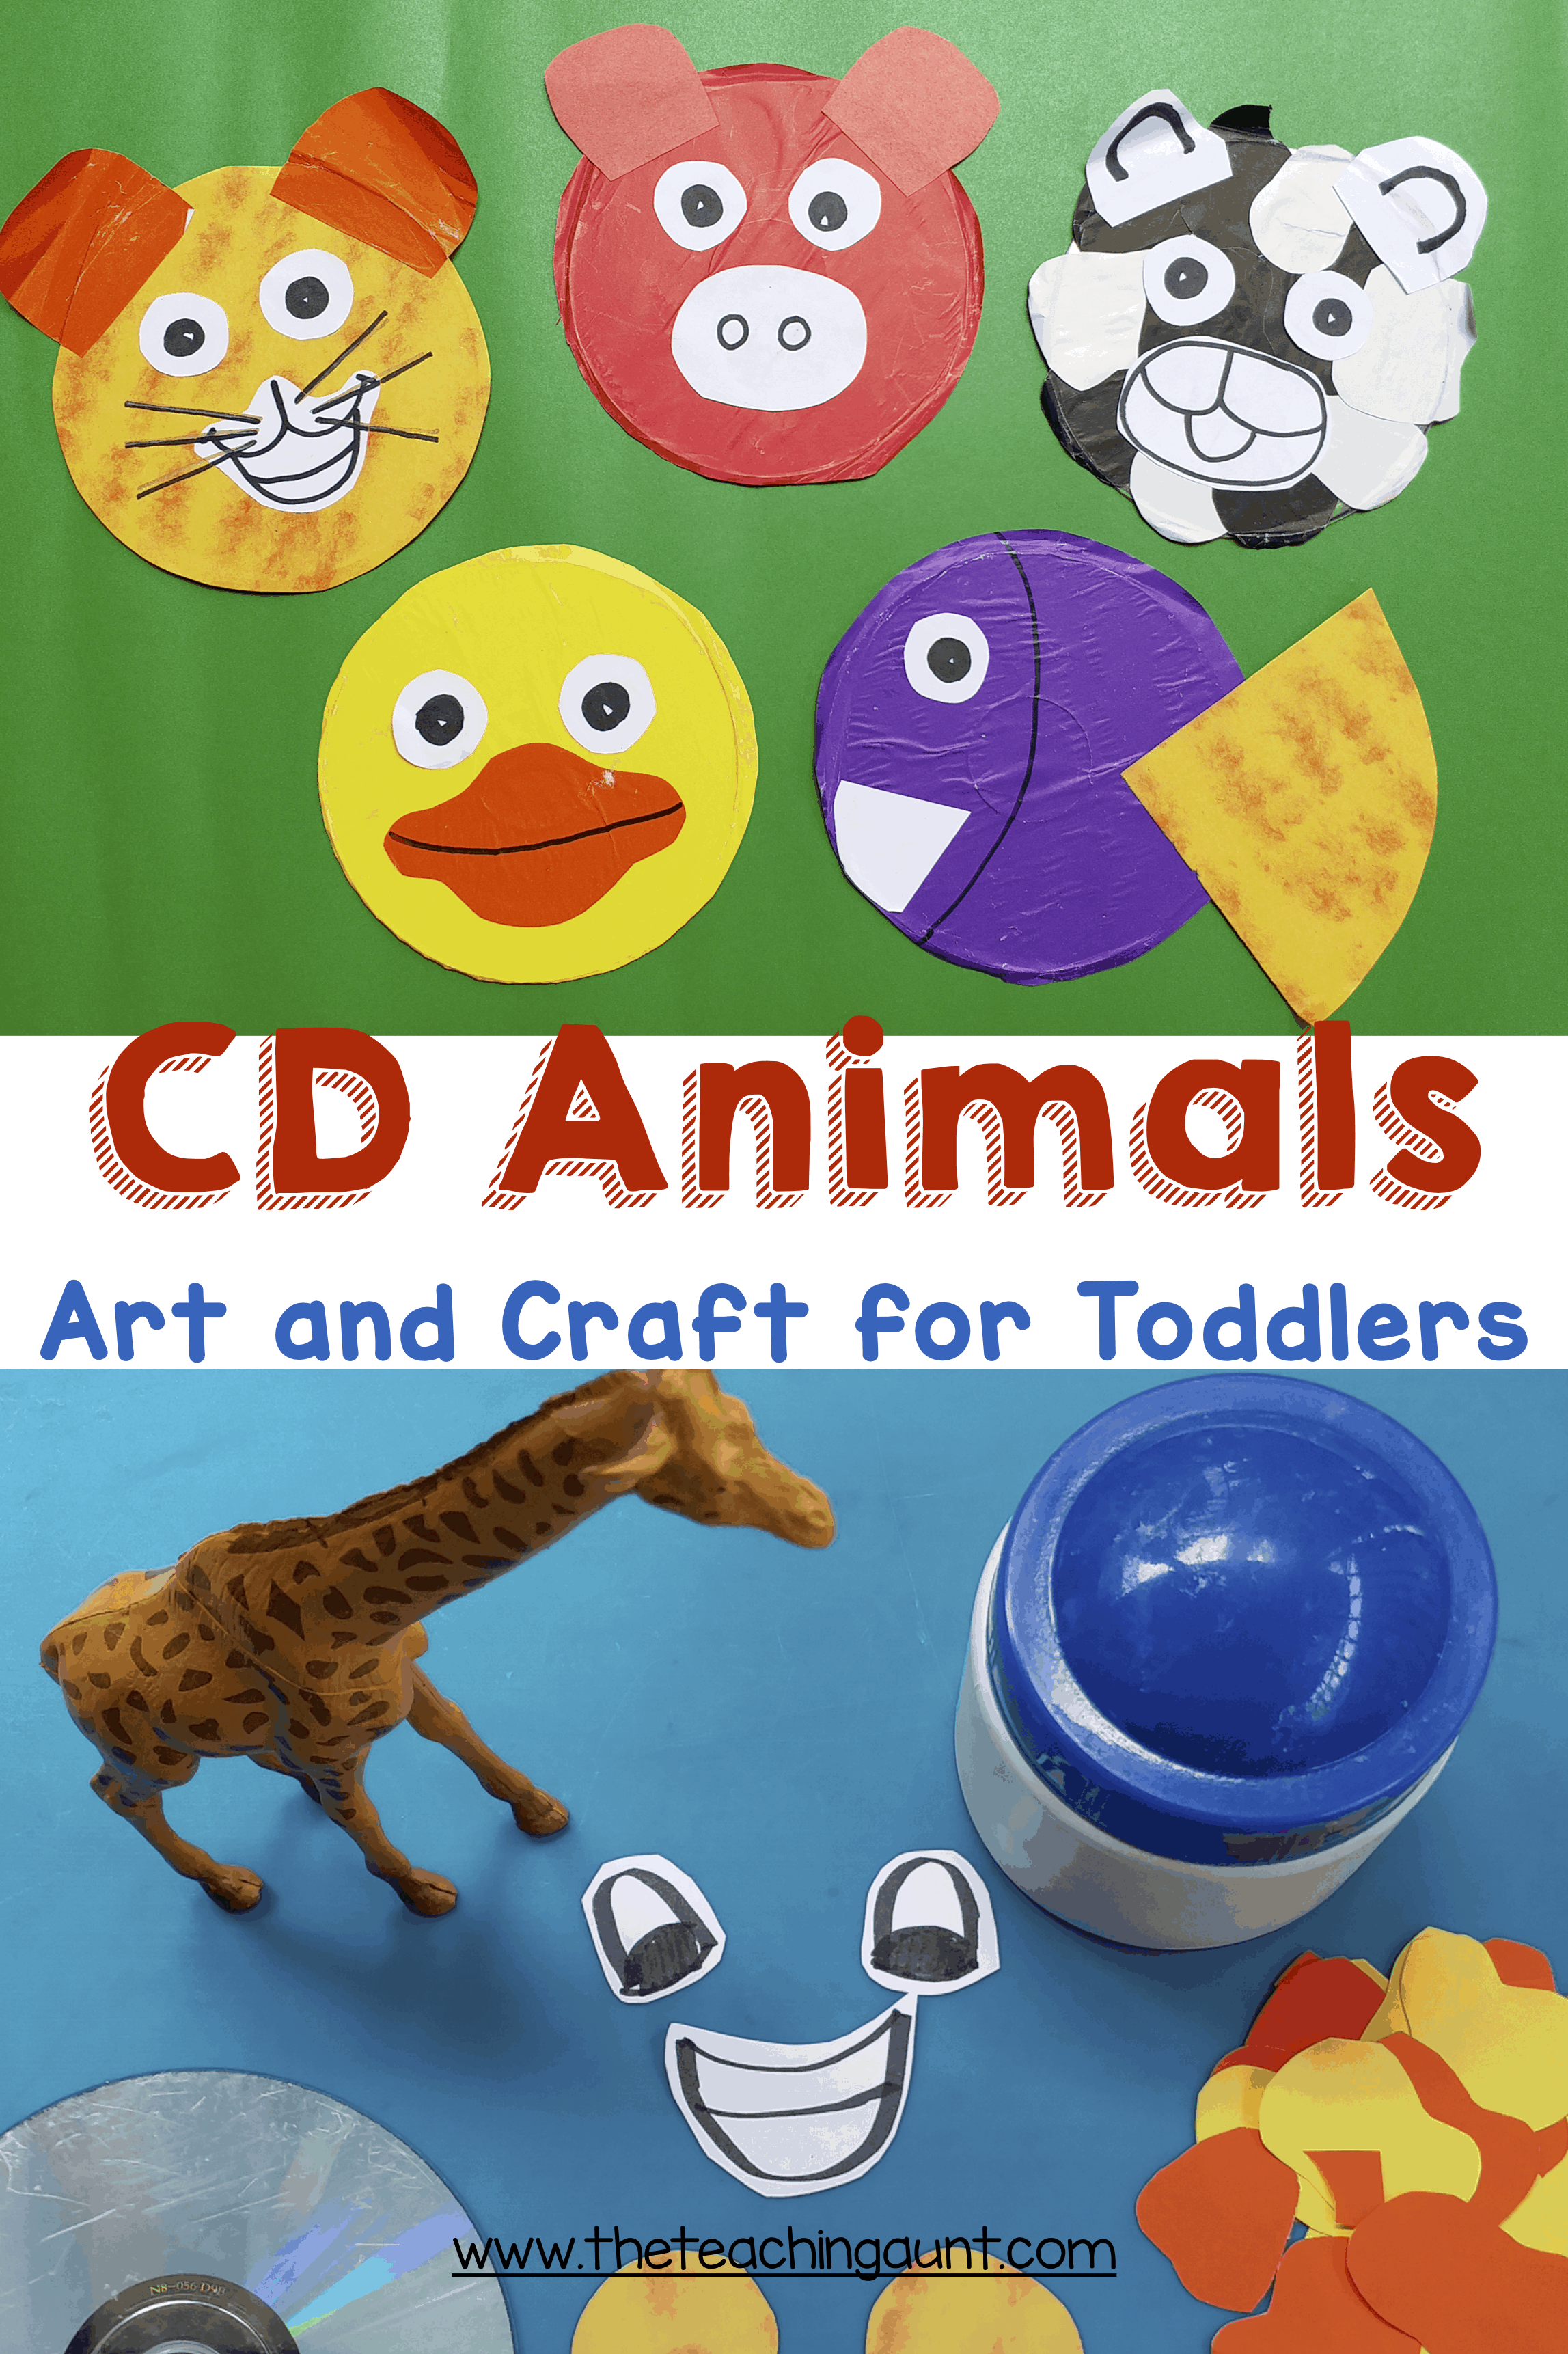 CD Art and Craft for Toddlers ad Children